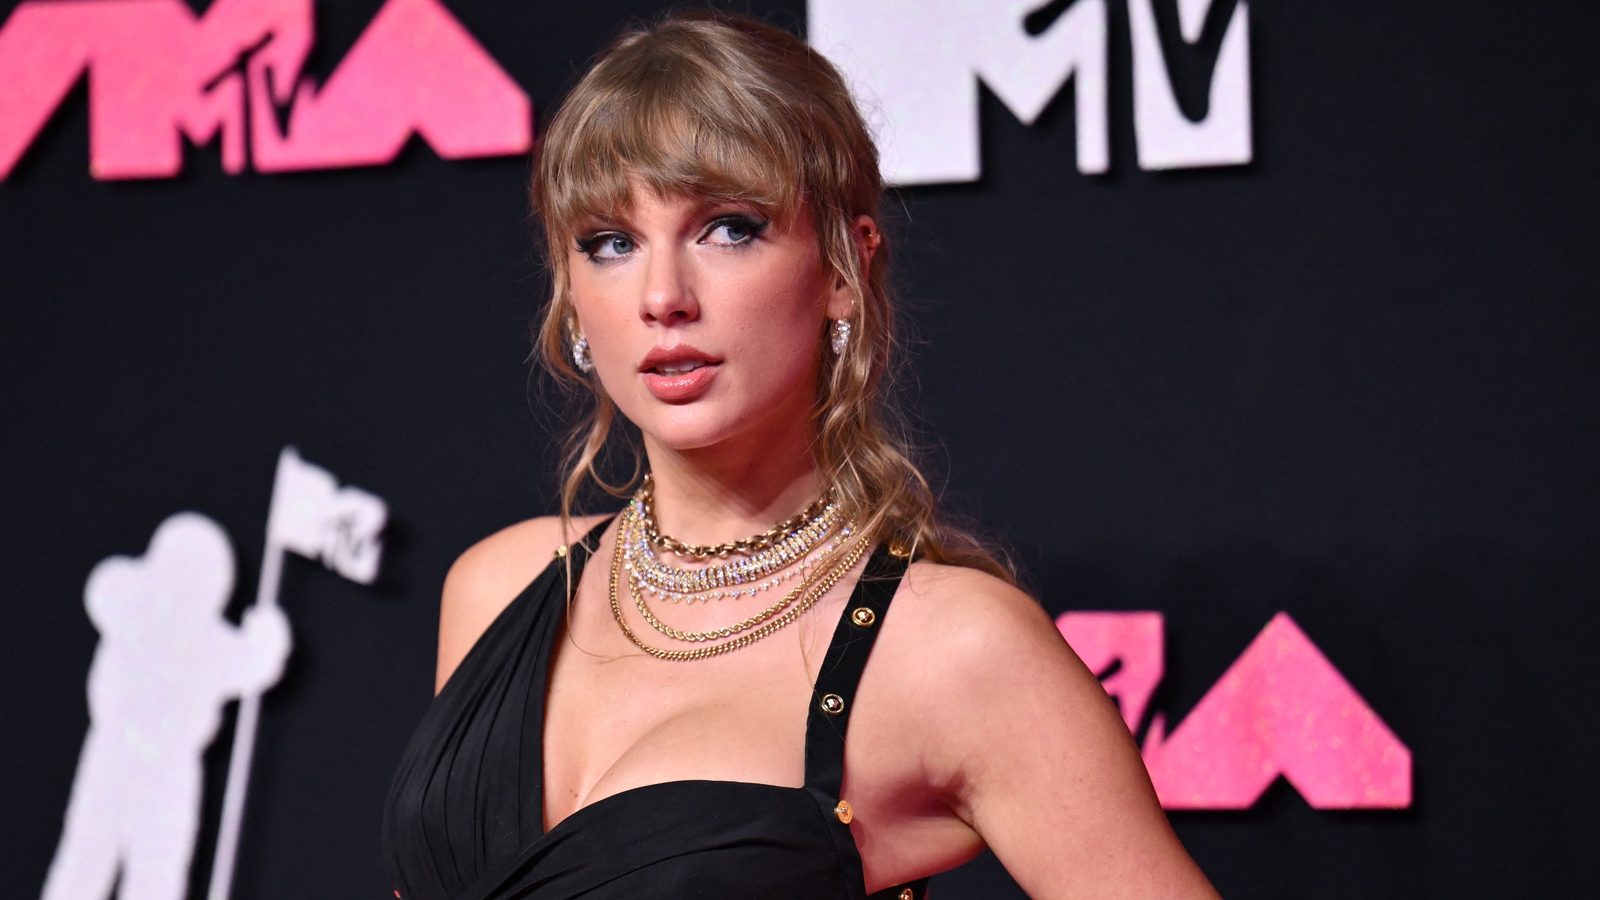 What the celebs wore on the MTV Video Music Awards pink carpet